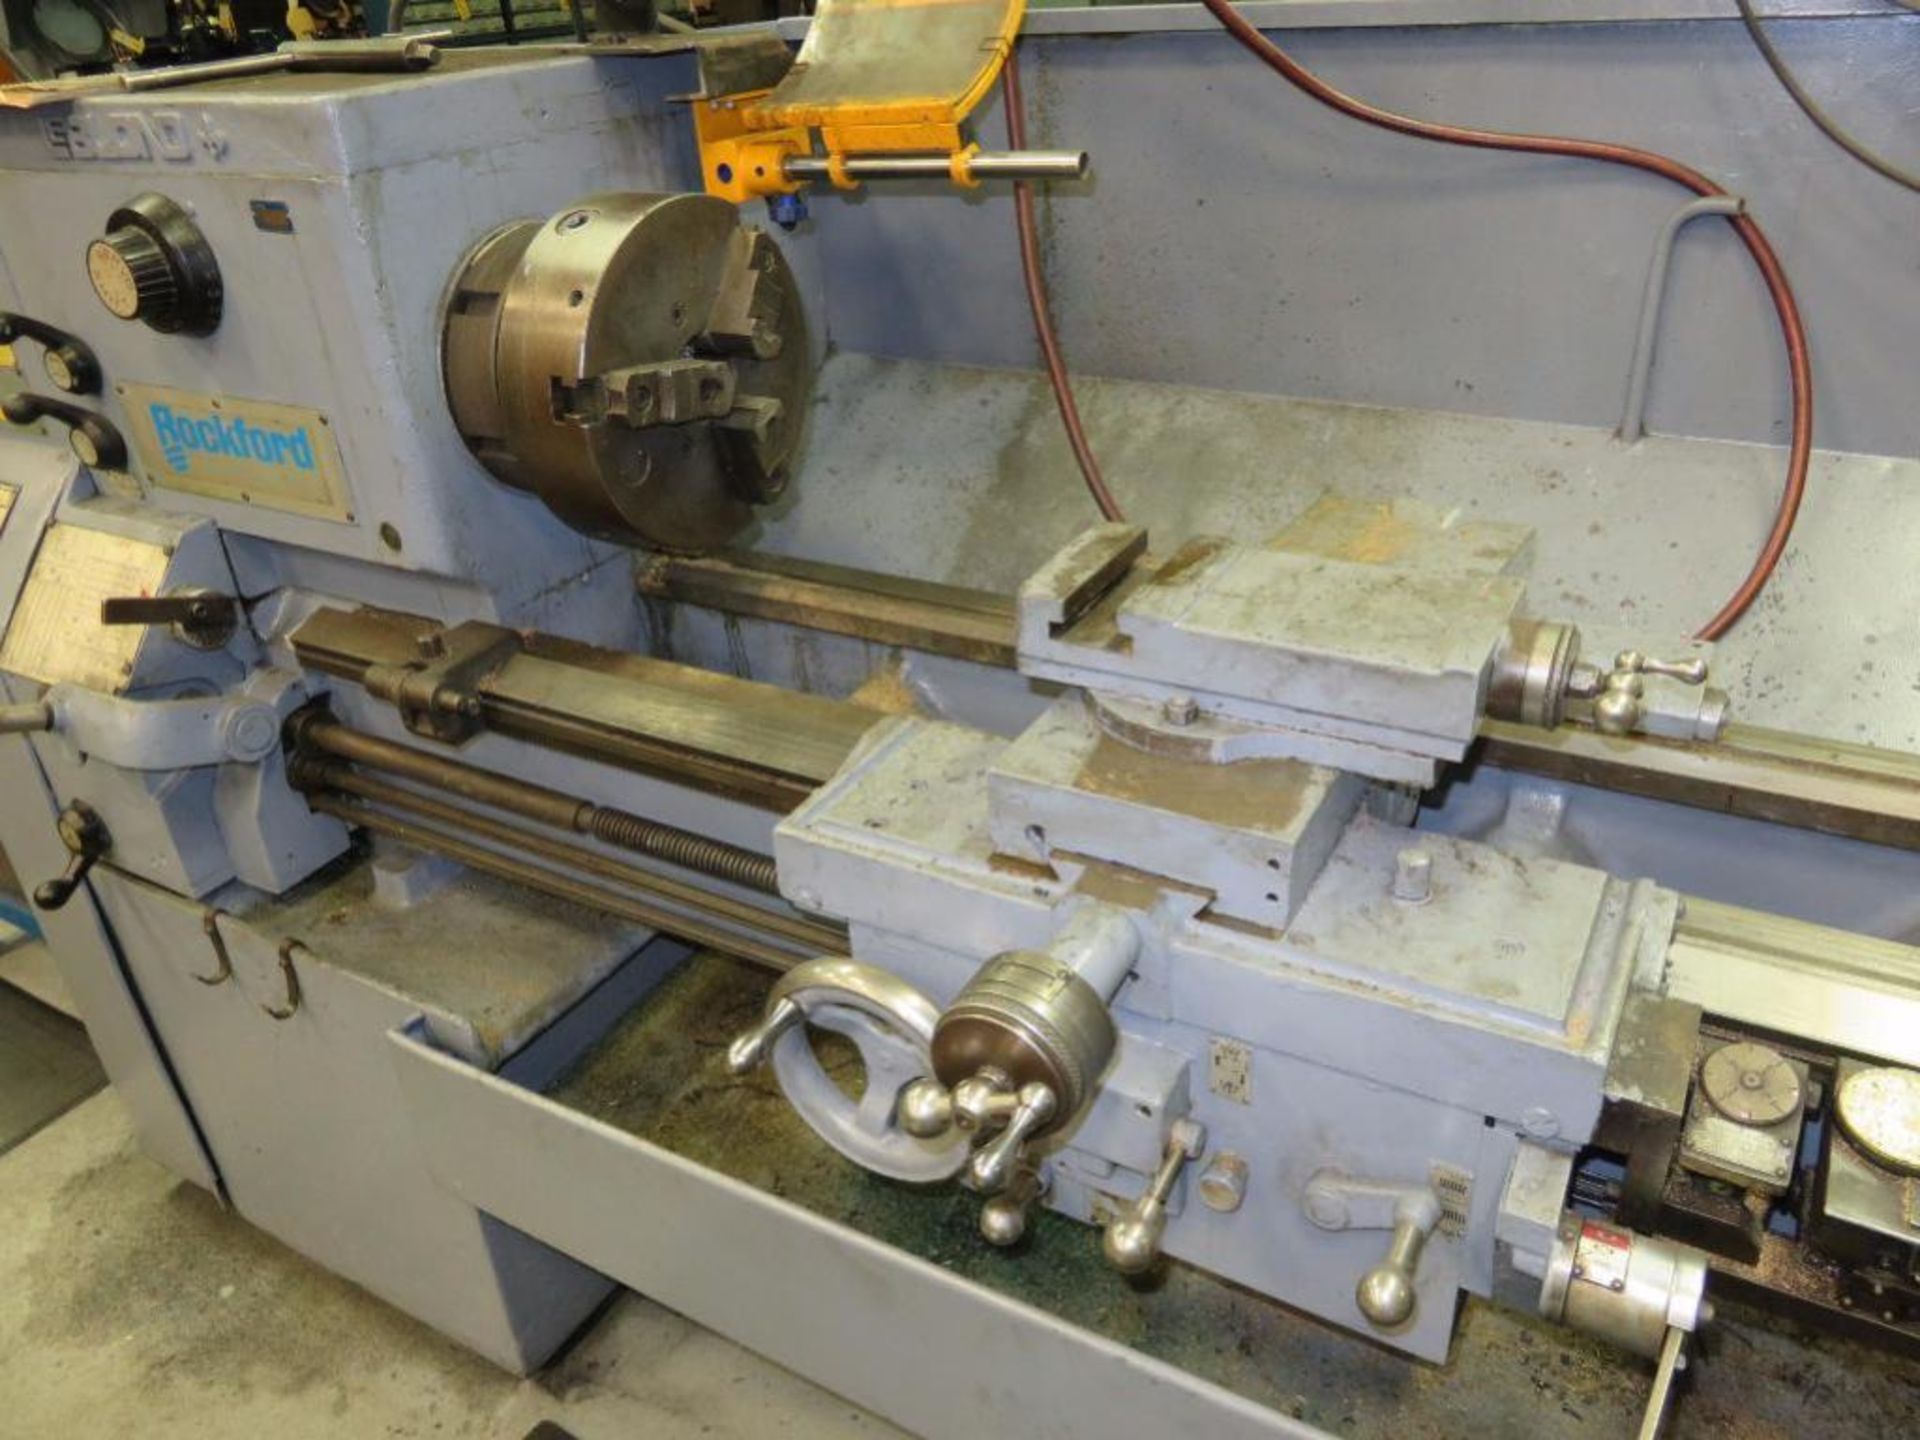 Leblond/Rockford 19 in. x 60 in. Pan Bed Geared Head Engine Lathe, S/N 12F223 (Location J) - Image 2 of 2